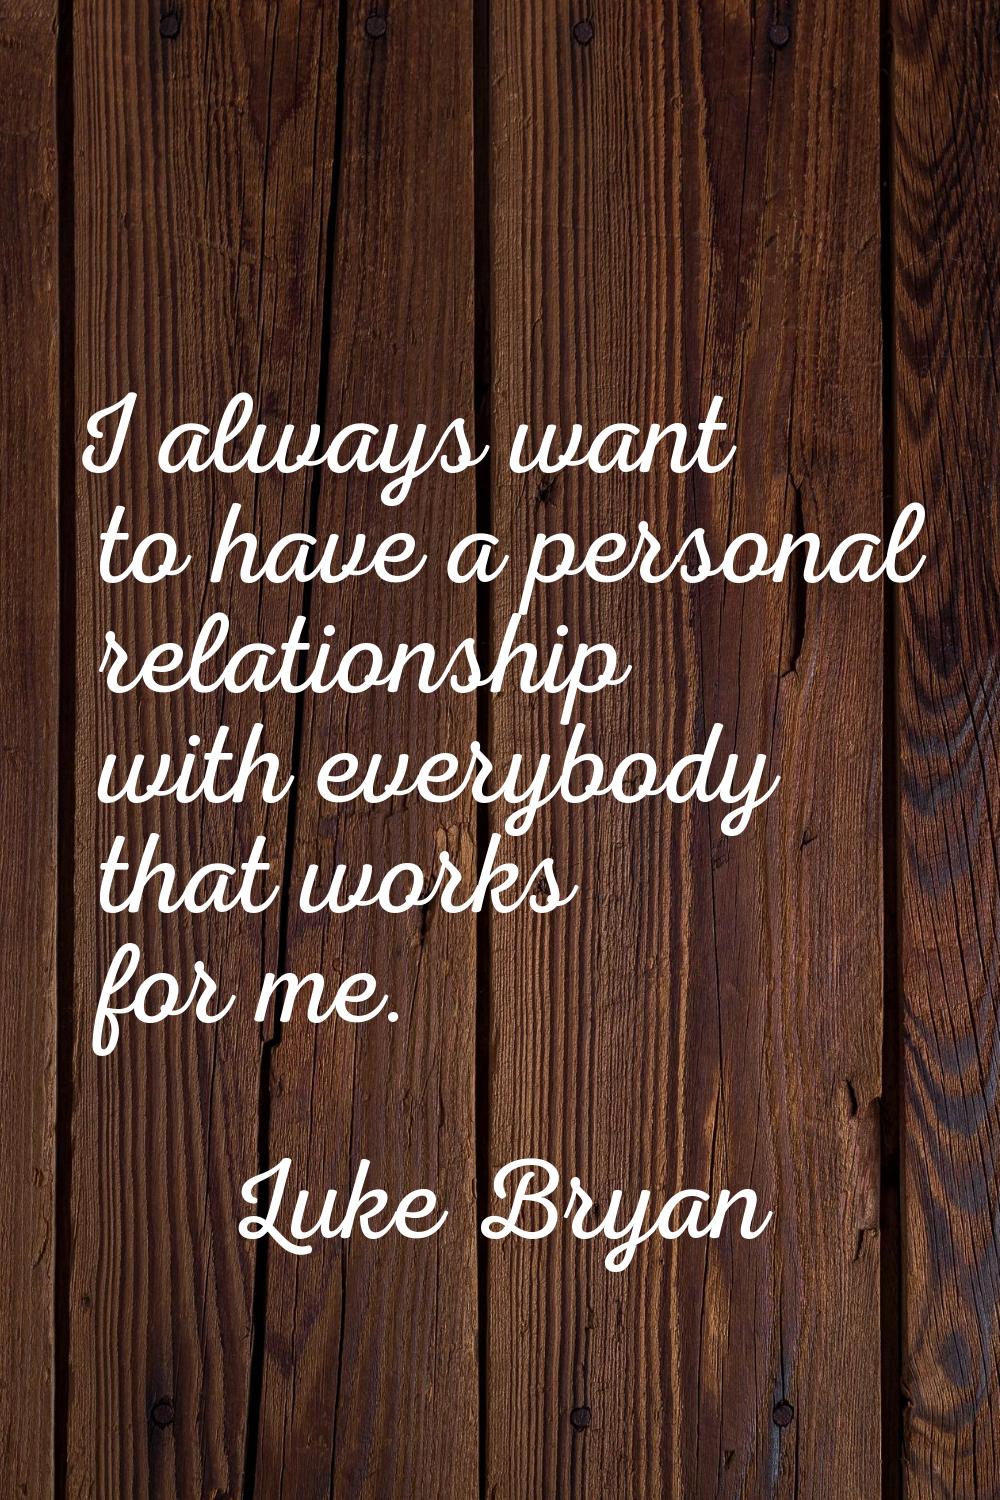 I always want to have a personal relationship with everybody that works for me.